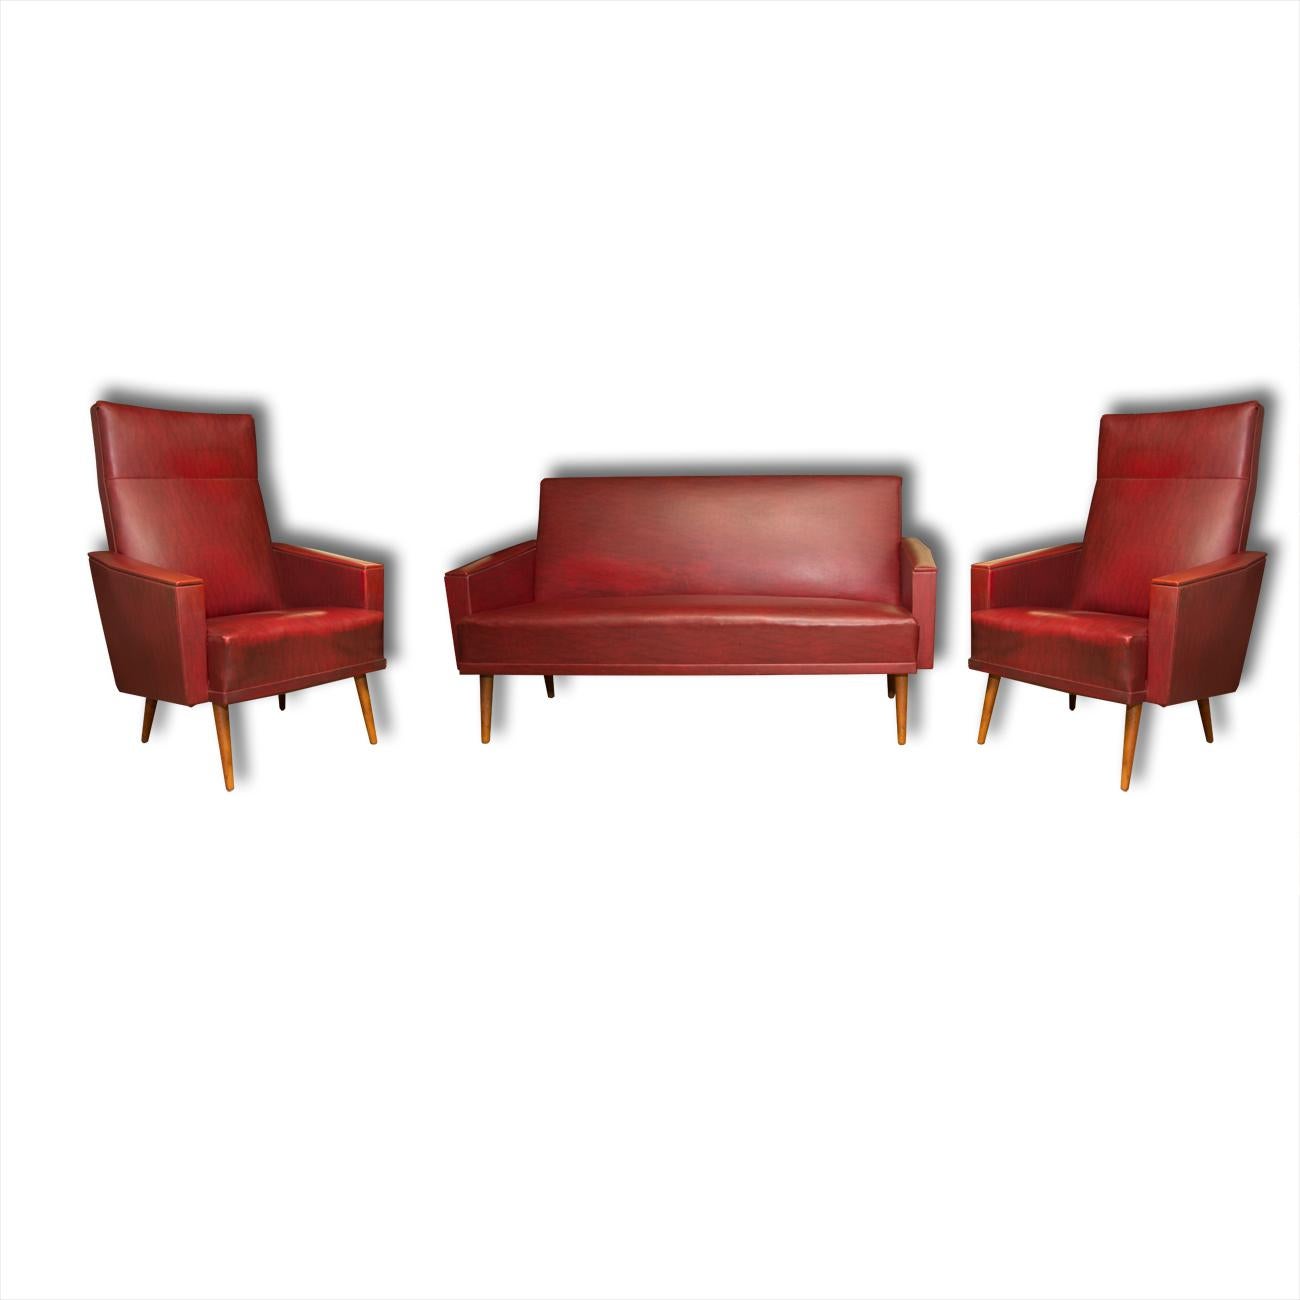 These lounge or office armchairs were made in the former Czechoslovakia in the 1960s. They are covered with burgundy leatherette. The legs are made of beech. In very good original condition. Price is for the pair.

 